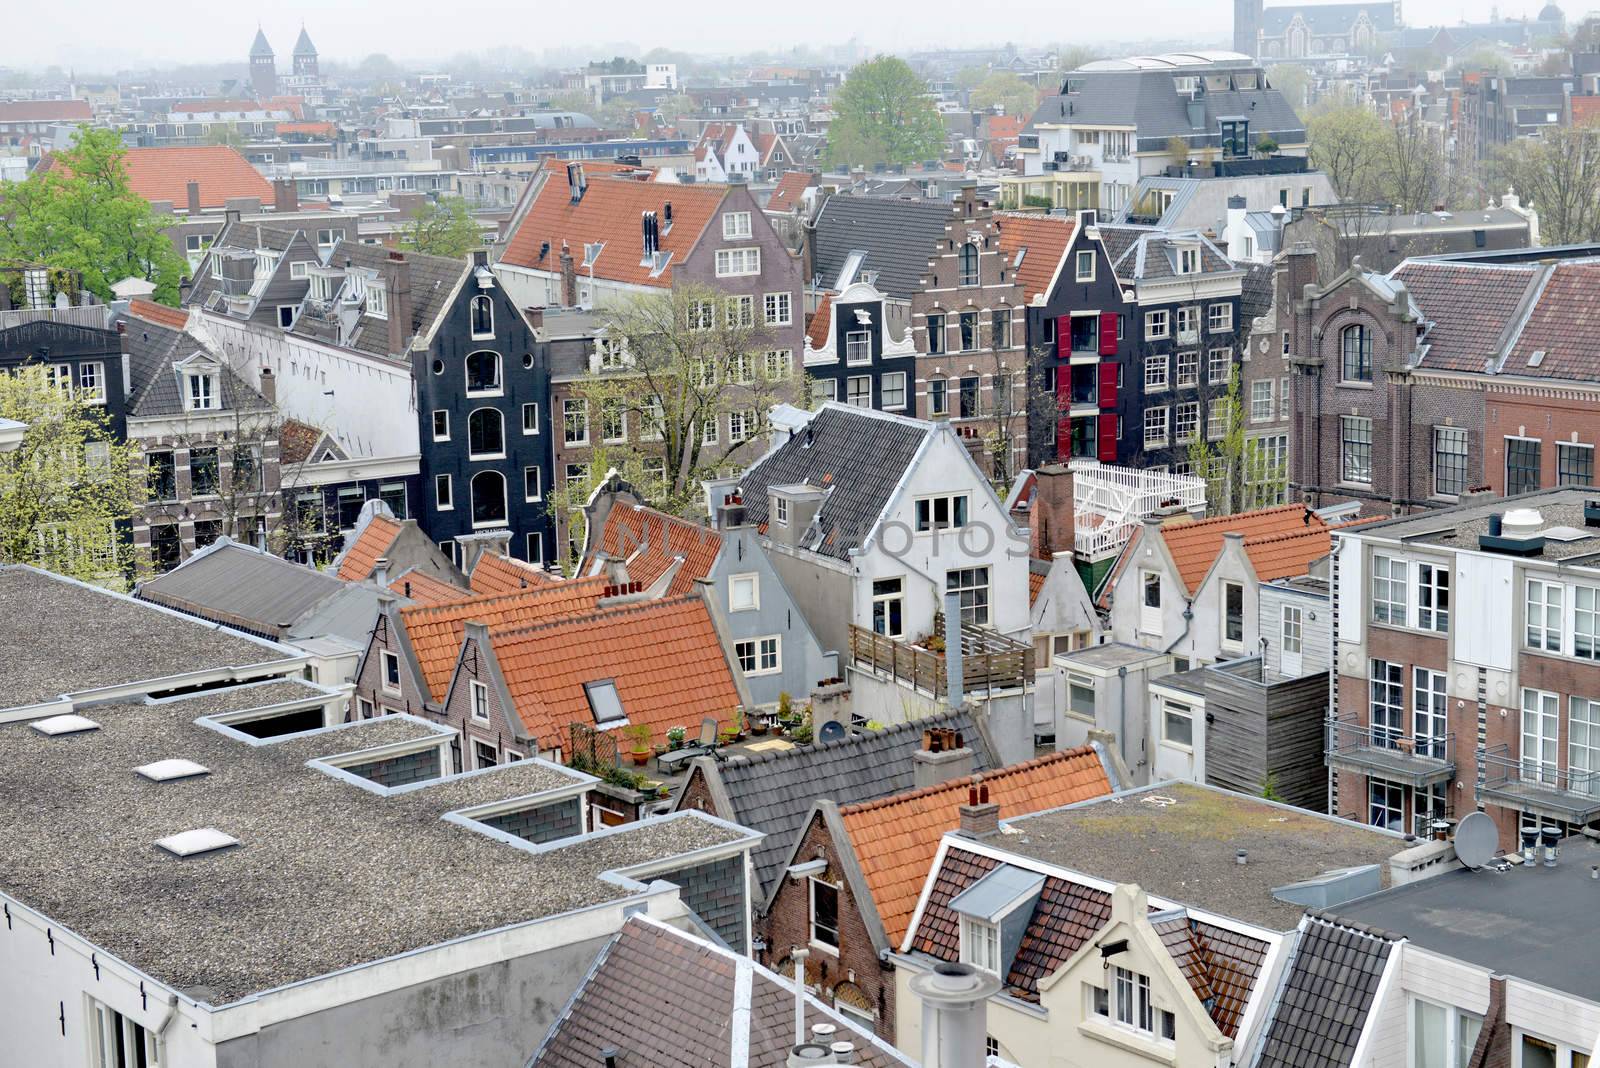 The roofs of Amsterdam by Alenmax